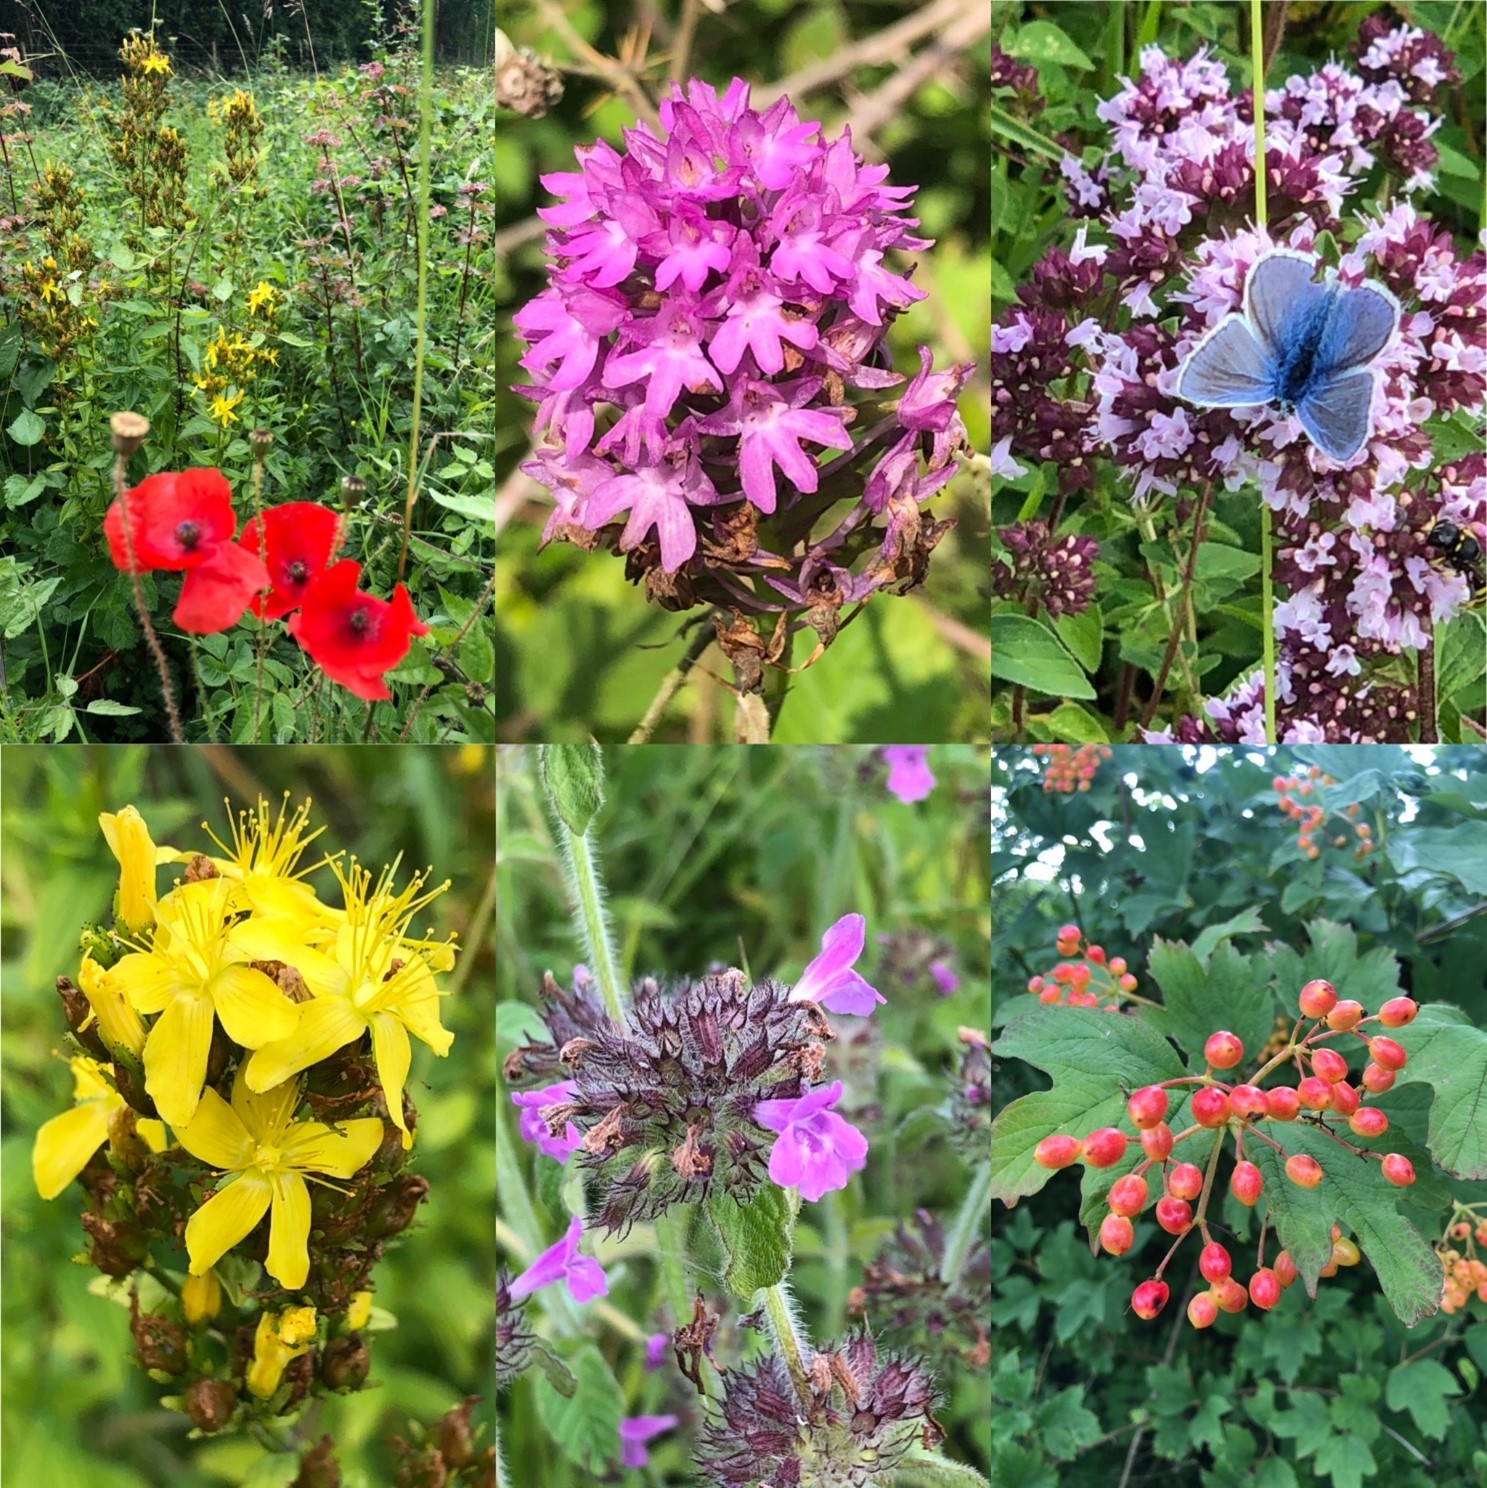 Selection of wild flowers from Teers Meadow (clockwise from top left) – common poppy, pyramidal orchid, wild marjoram with common blue butterfly, guelder rose, wild basil, hairy St John’s wort.